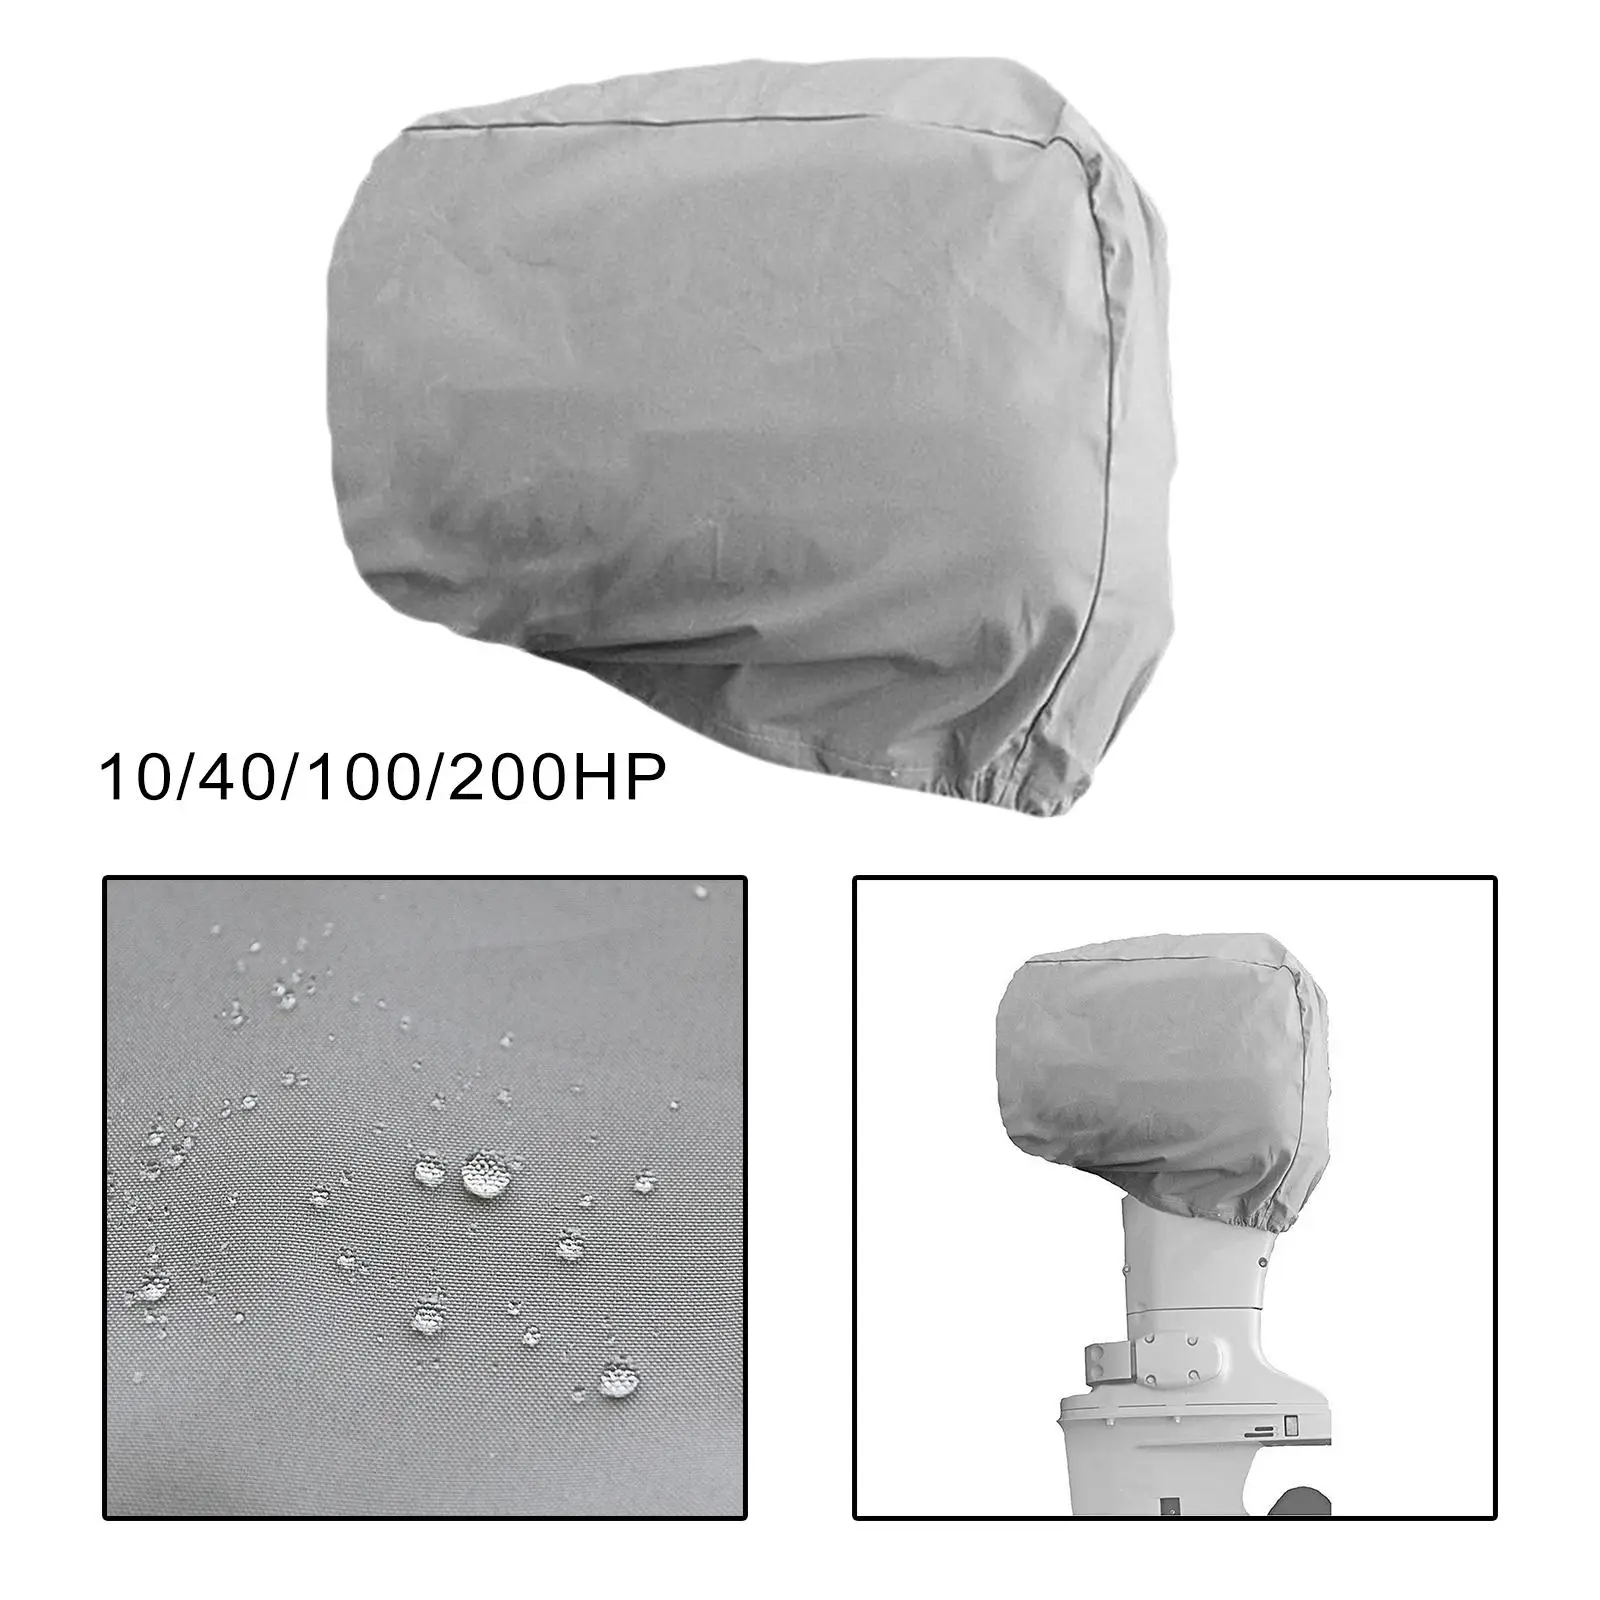 Boat Hood Covers Waterproof Weather Resistant Outboard Motor Cover for Boats